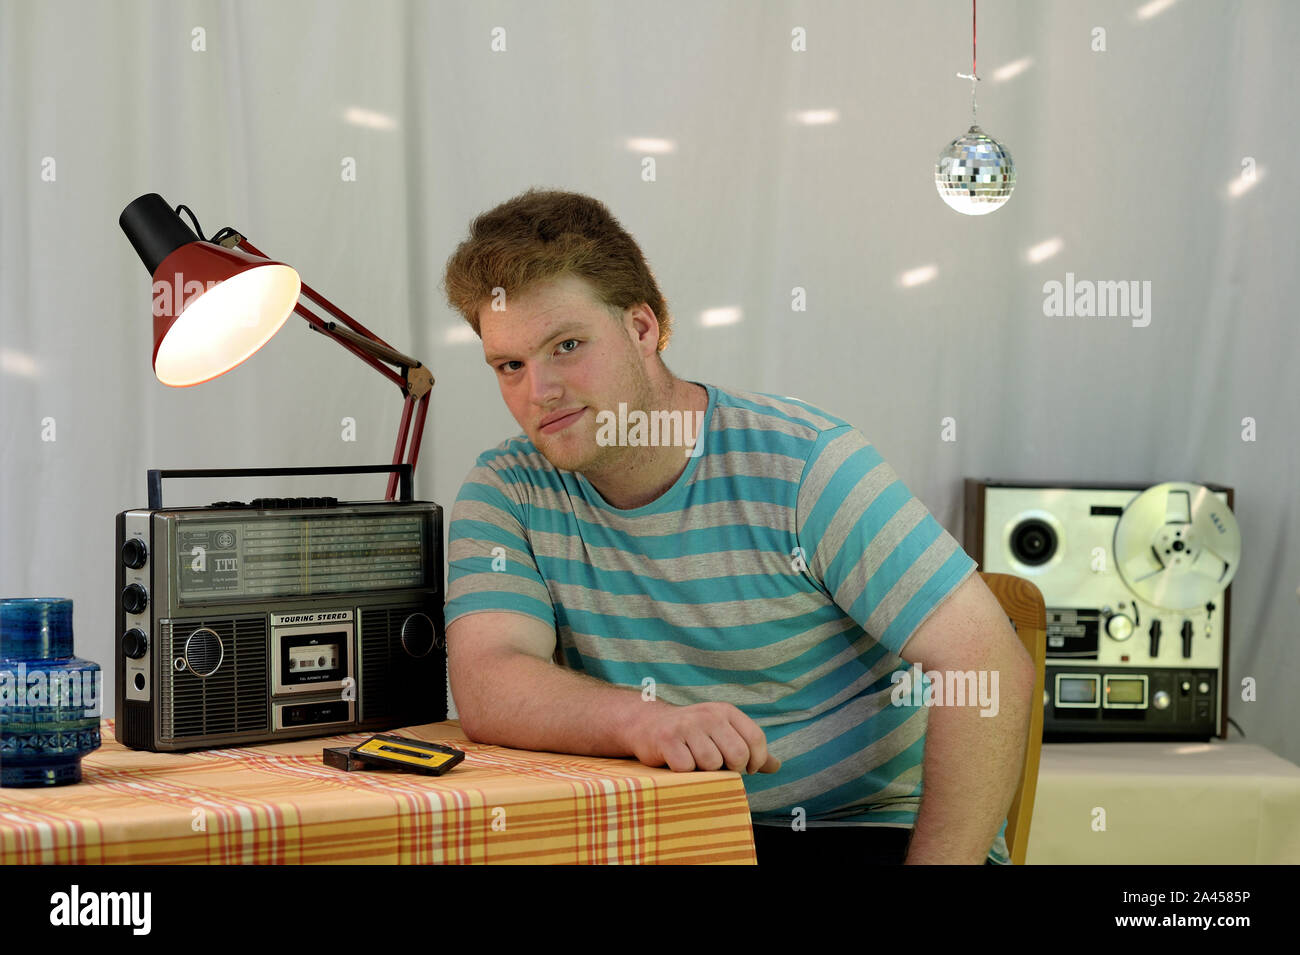 70s and 80s electronic music devices Stock Photo